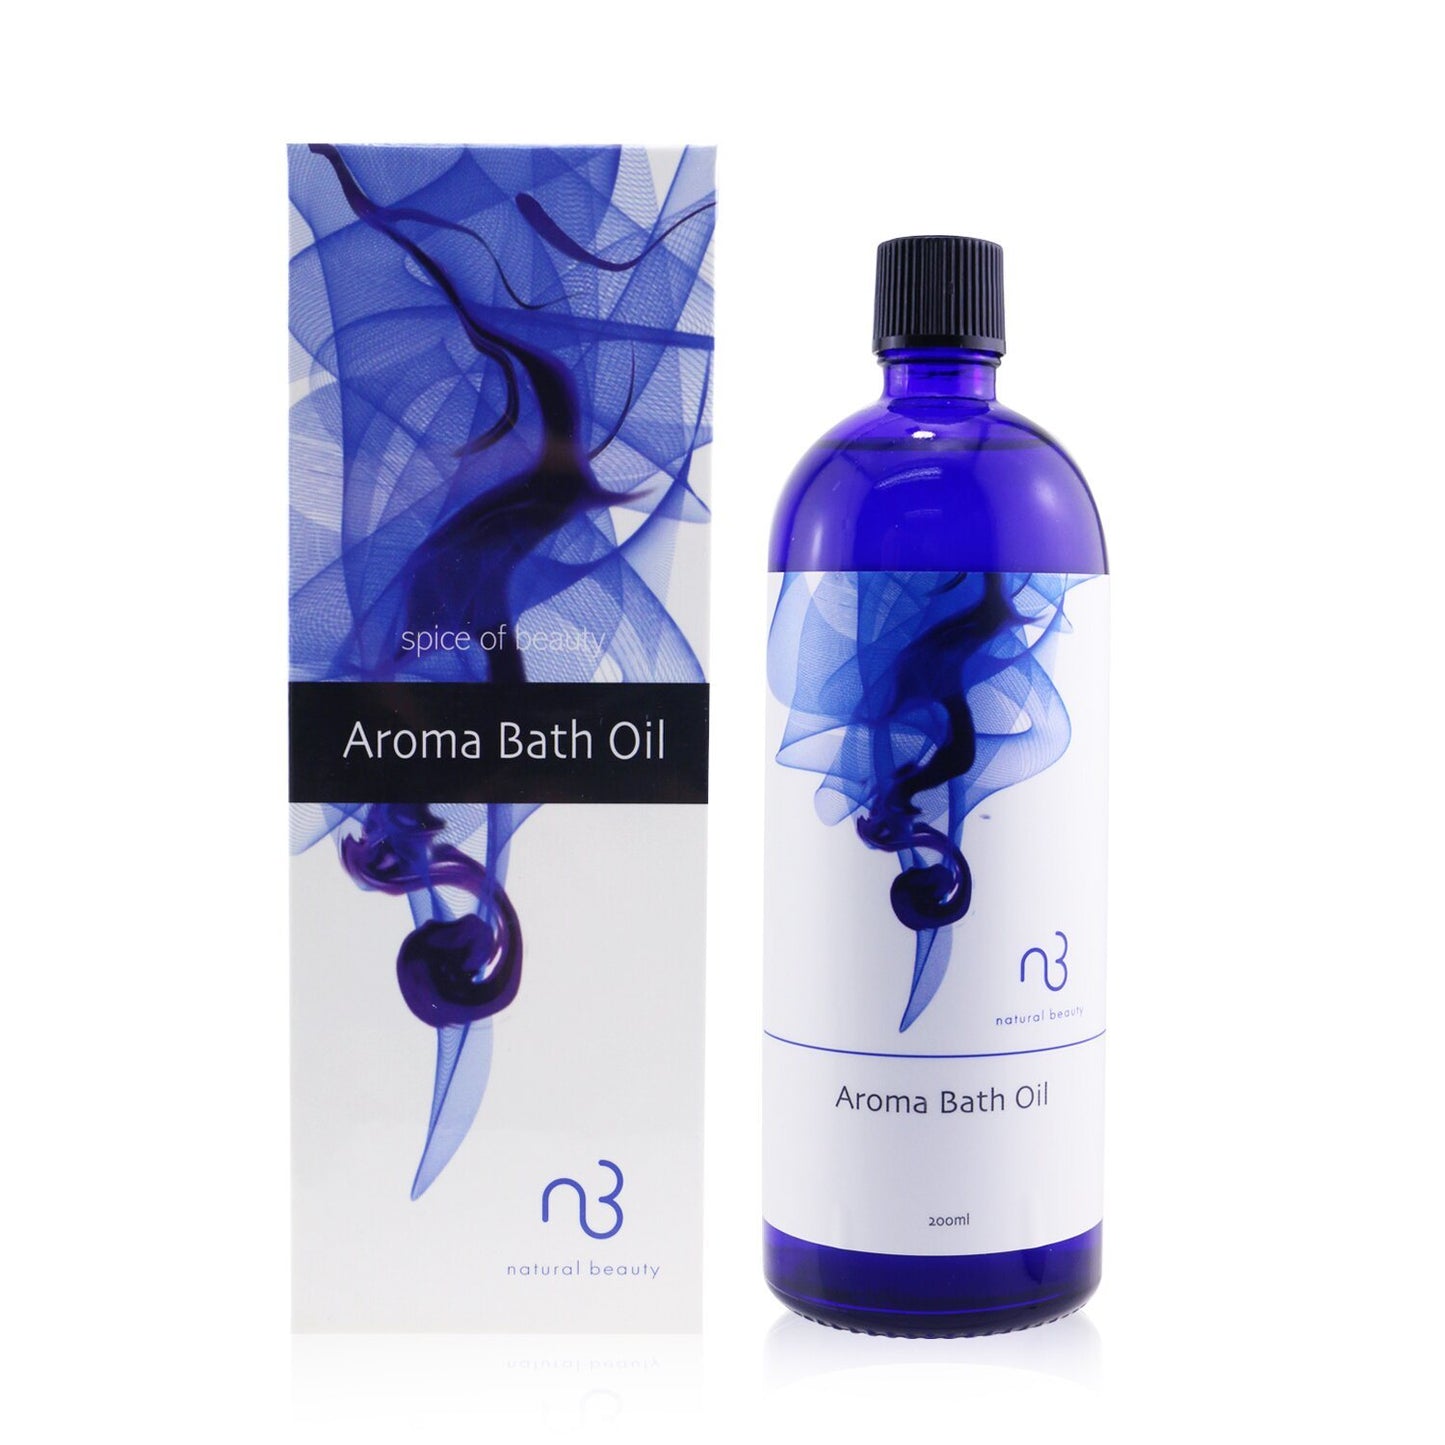 Spice of Beauty Aroma Bath Oil - Relaxing Aroma Bath Oil - lolaluxeshop